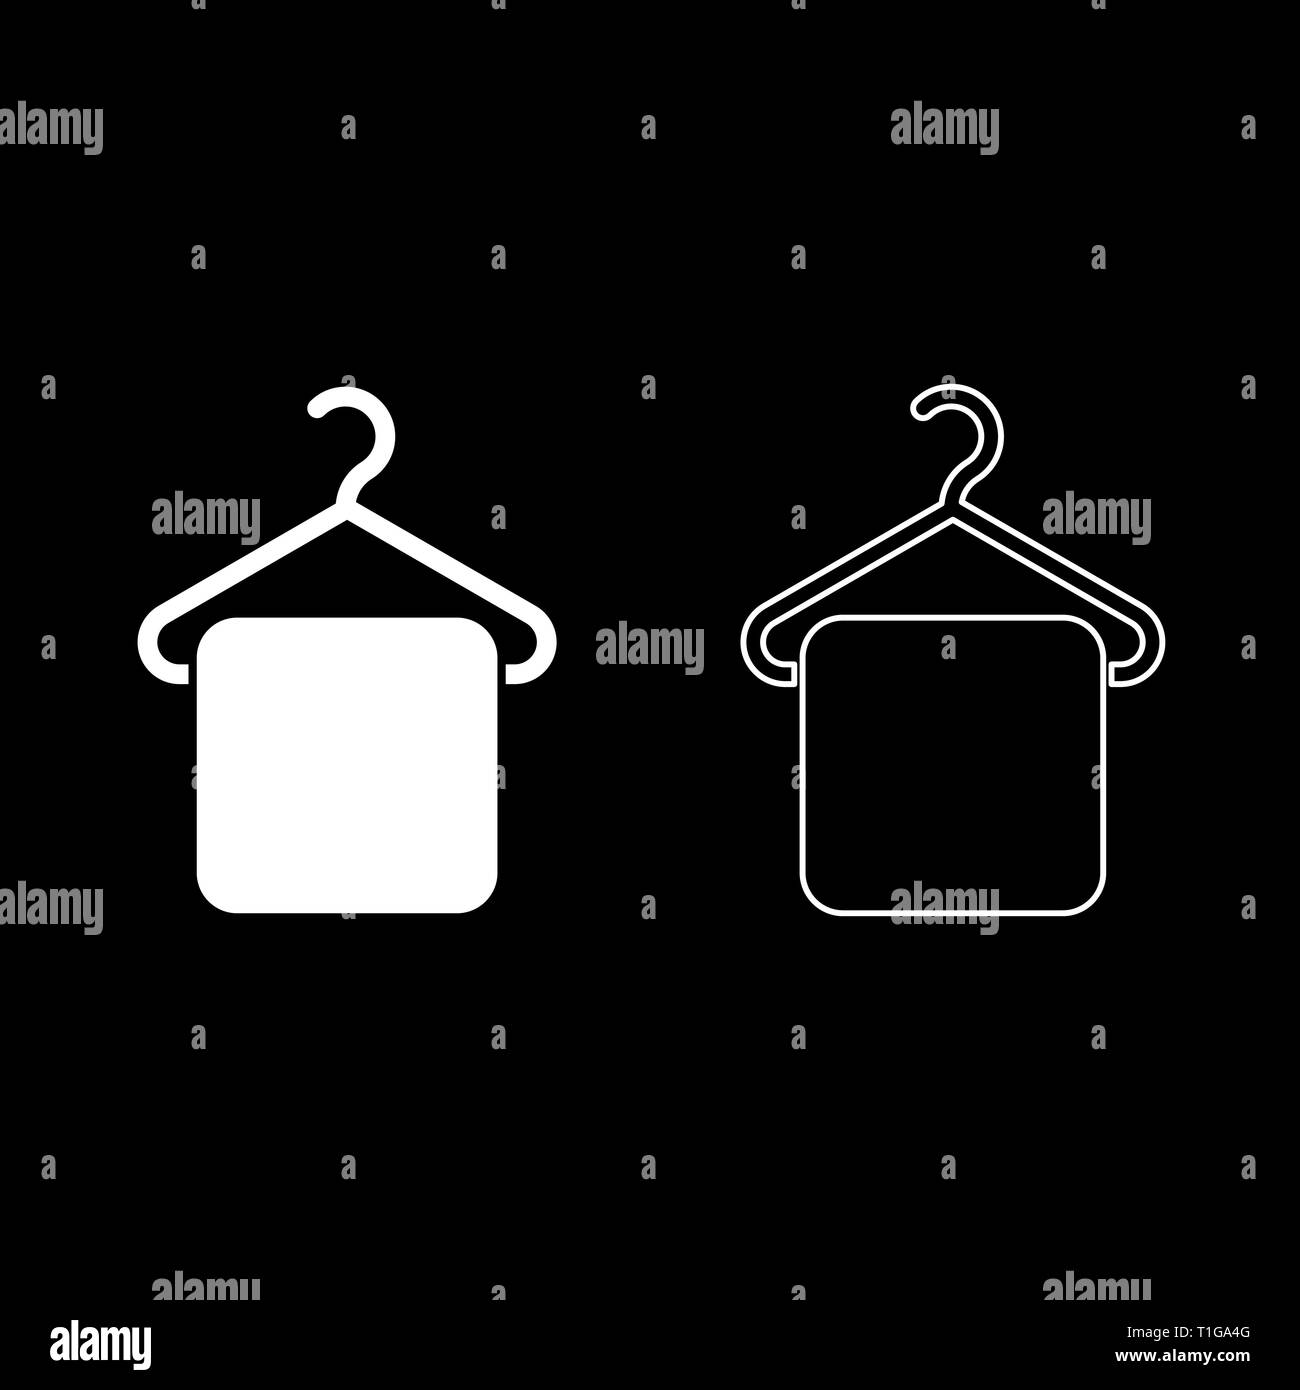 Towel on hanger Hanger towel Clothes hanger with hanging towel icon set white color vector illustration flat style simple image Stock Vector